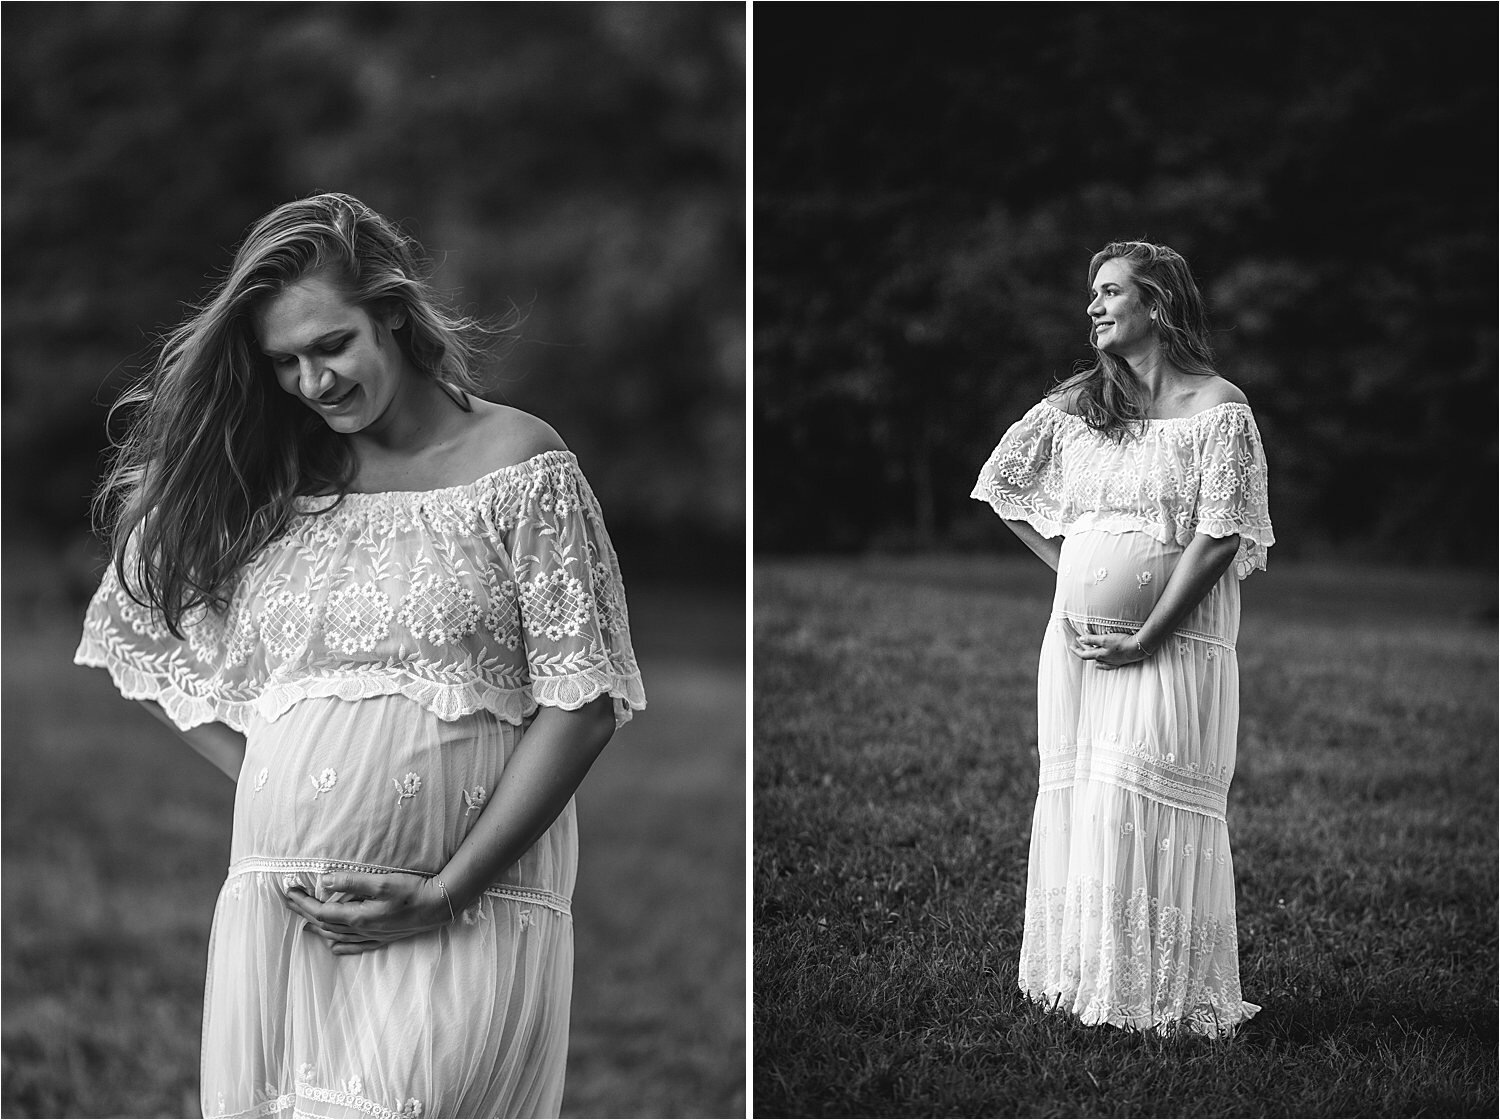 Central_Park_Maternity_Session_with_NYC_Baby_Photographer_Nicole_Hawkins_Photography_September_2019-17_Web.jpg